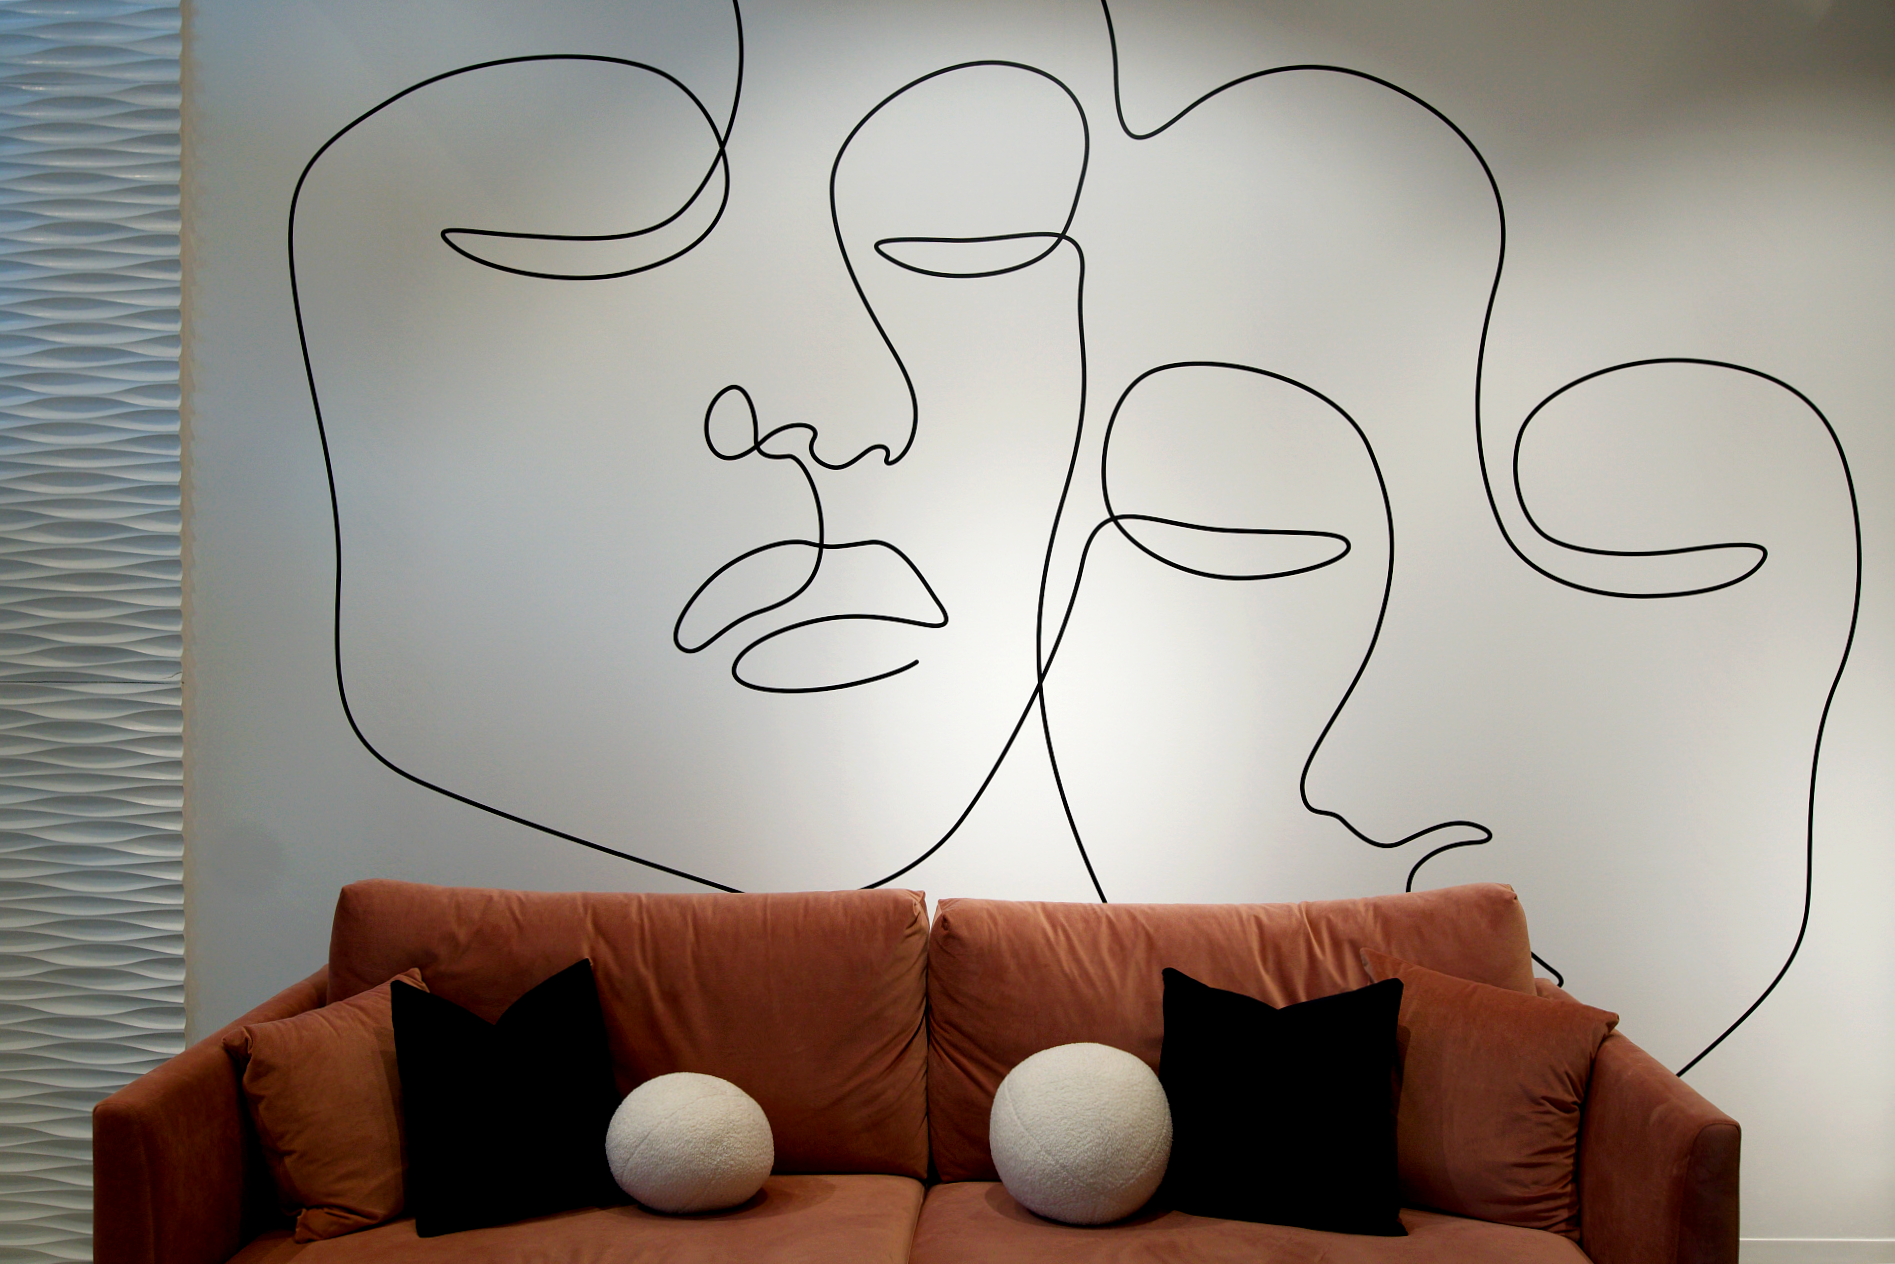 brown couch with decor pillows in front of one line drawing of two faces on wall at a spa